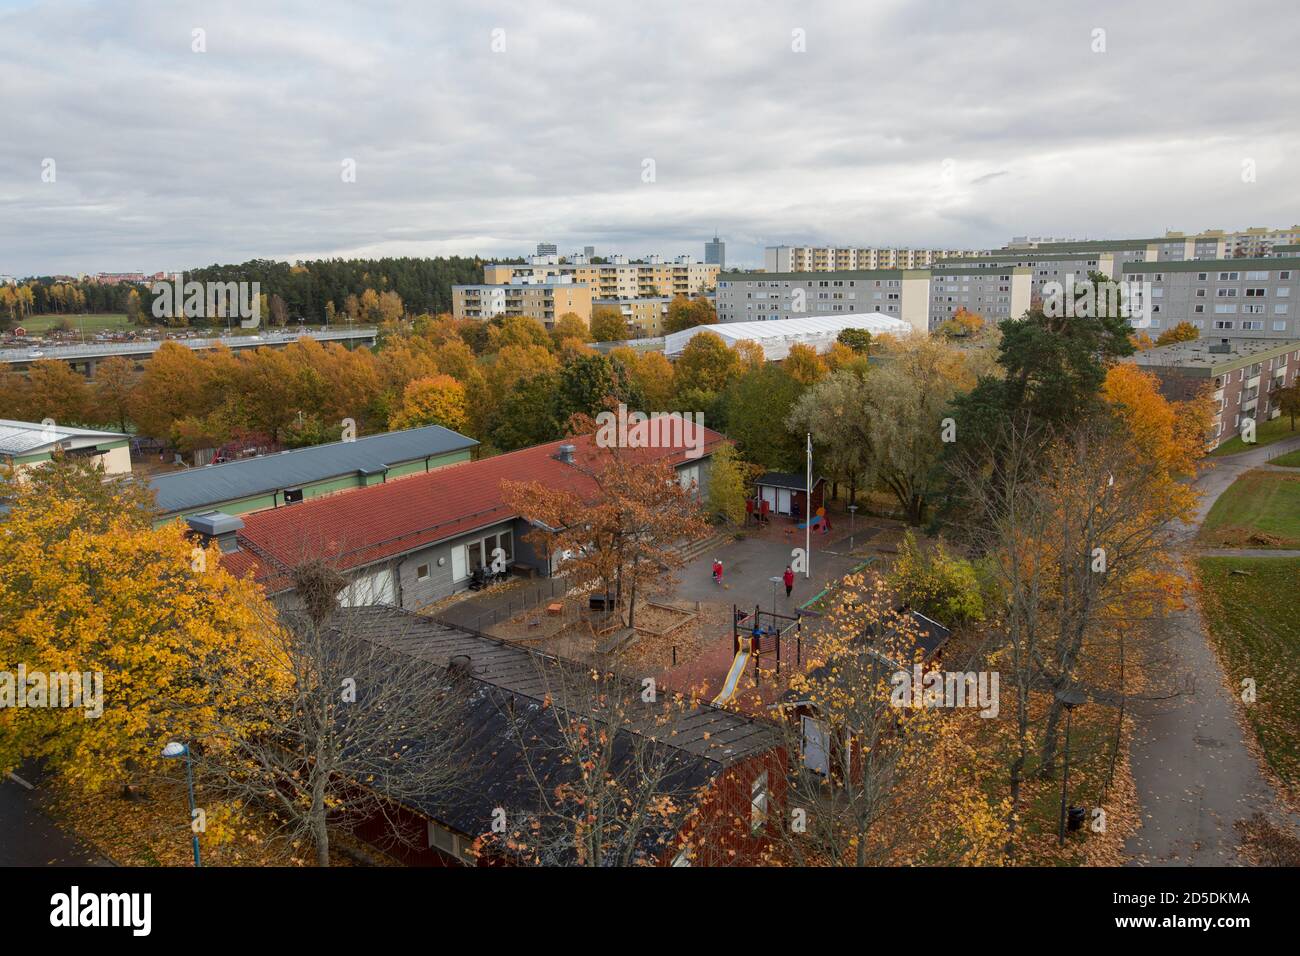 View of Tensta with kindergarten in the foreground. Stock Photo